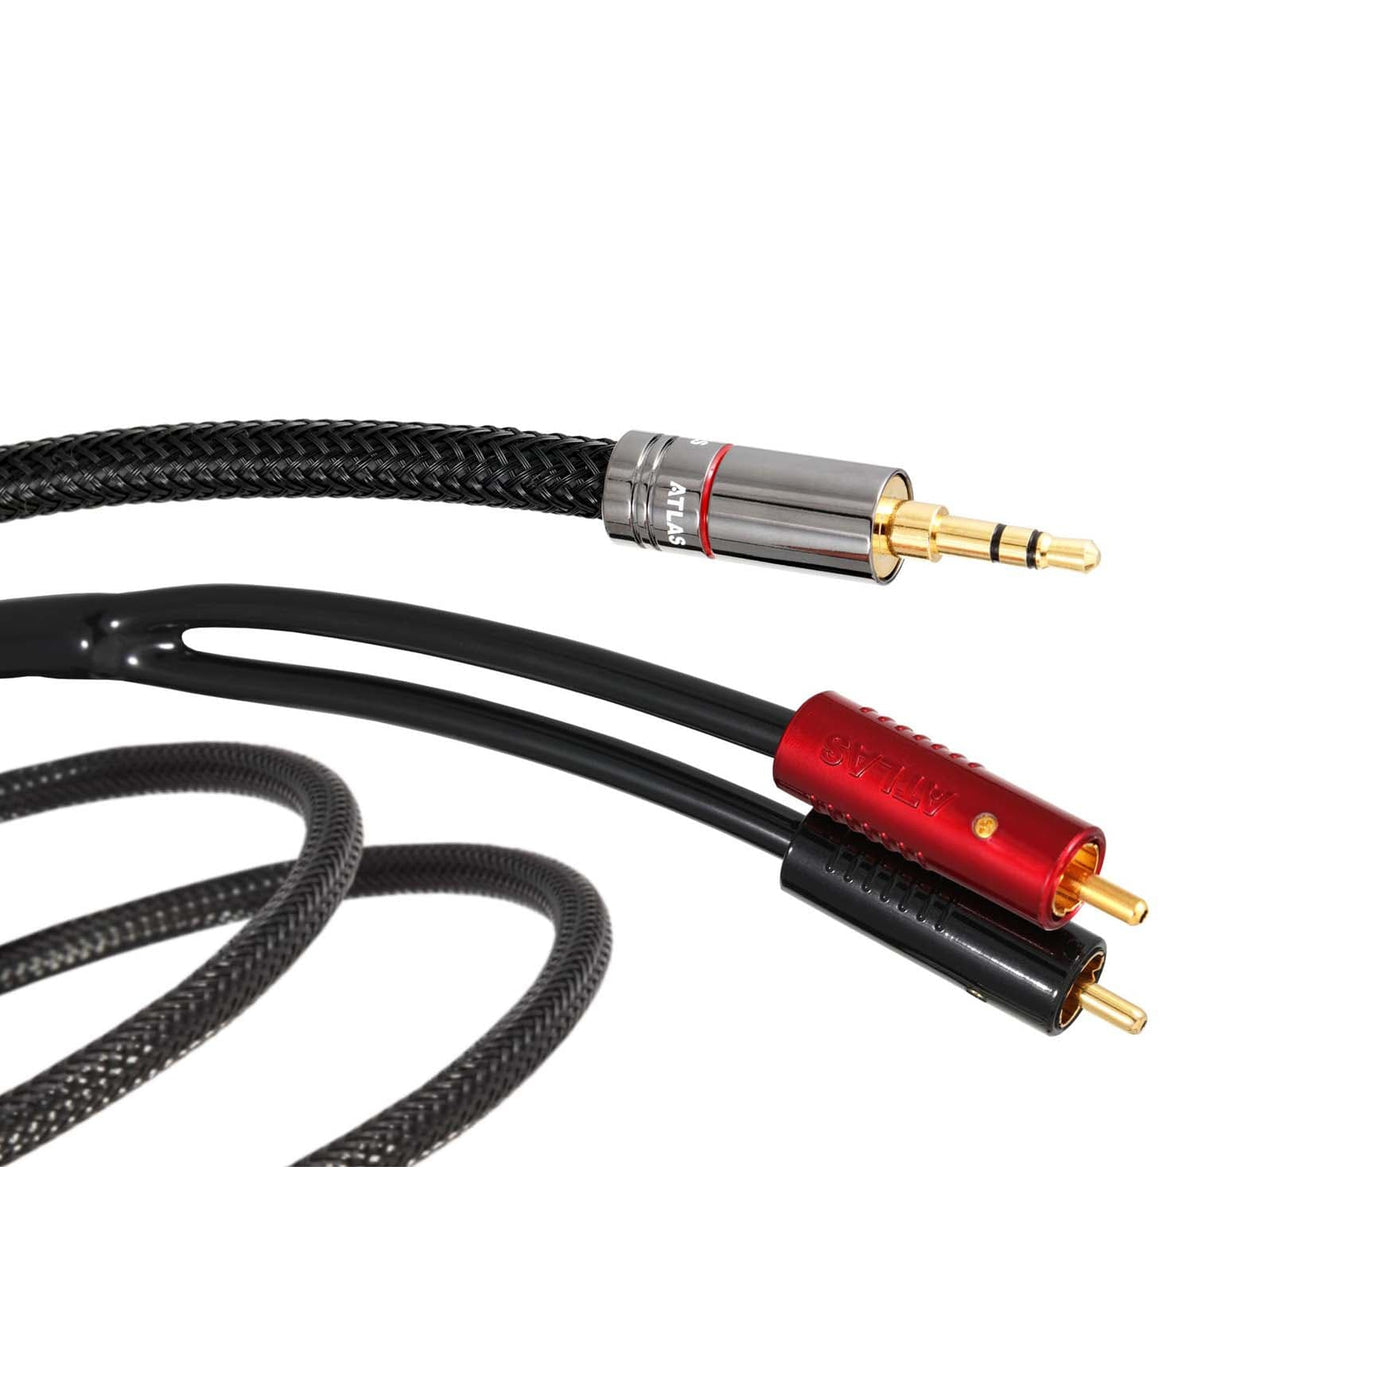 Atlas Hyper DD Metik 3.5mm—Achromatic RCA S/PDIF Cable at Audio Influence